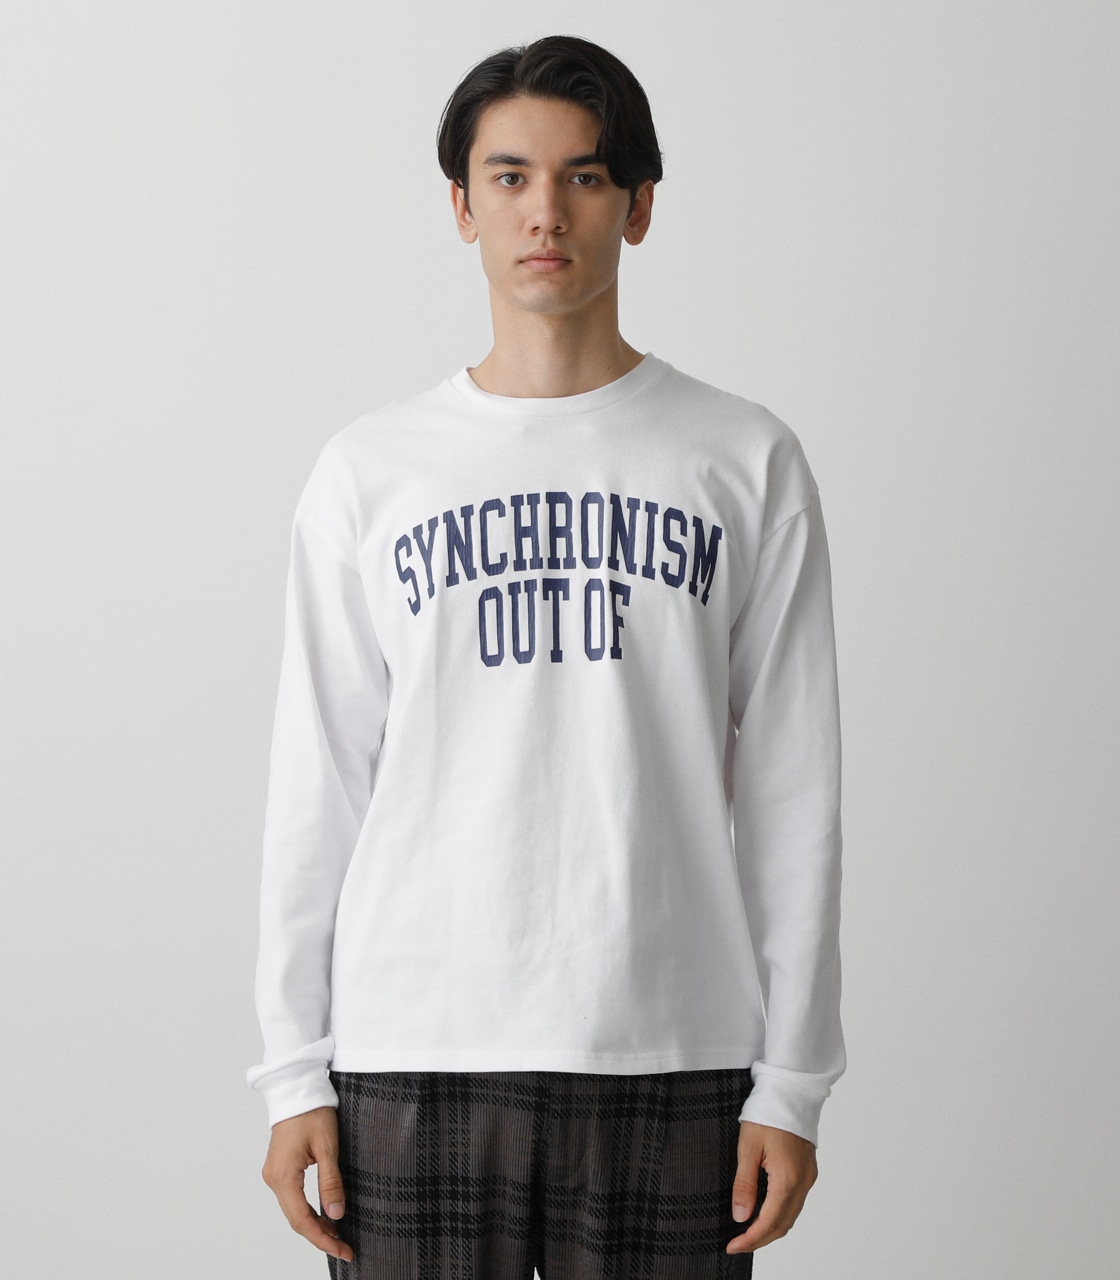 OUT OF SYNCHRONISM LONG TEE/アウトオブシンクロロングTシャツ 詳細画像 WHT 5